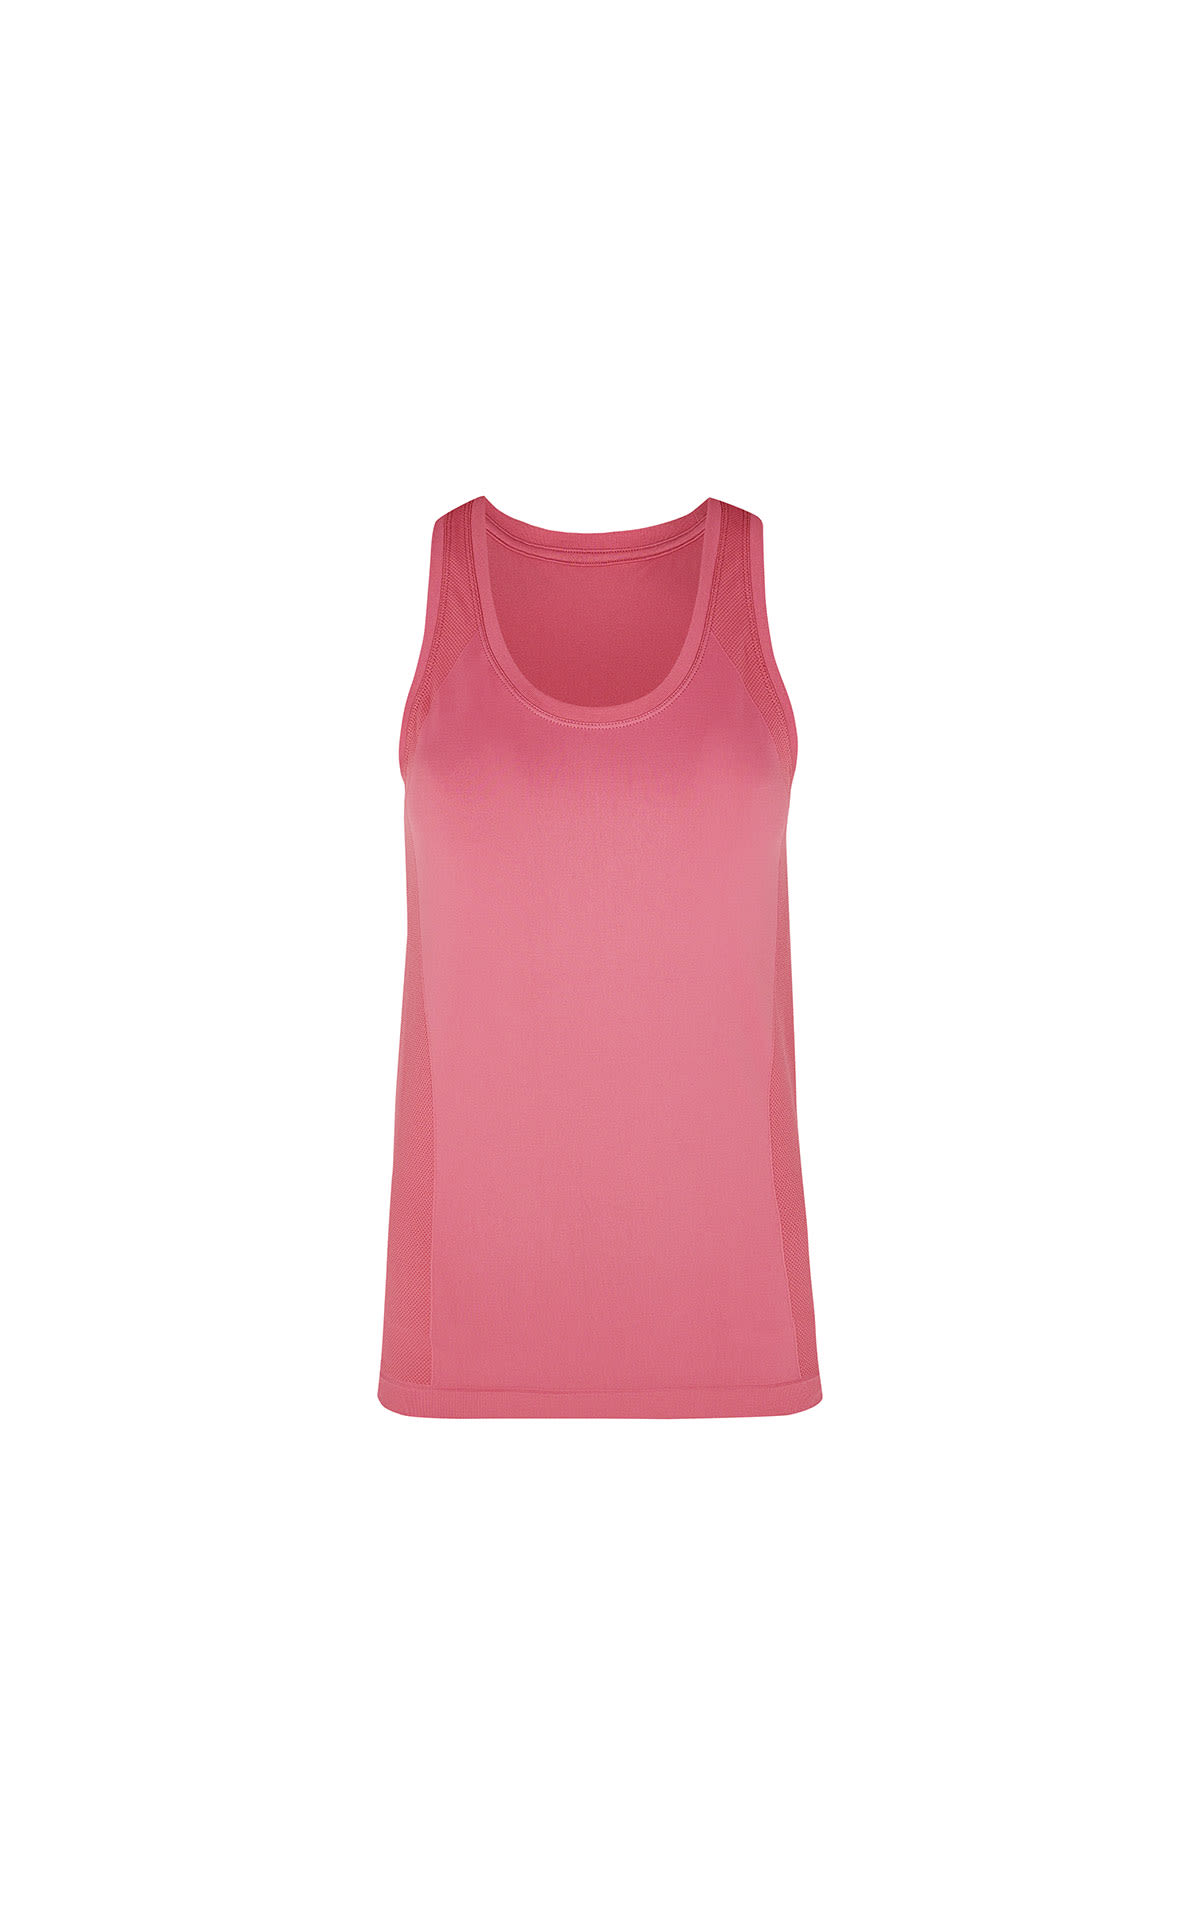 Sweaty Betty Athlete seamless workout tank top from Bicester Village